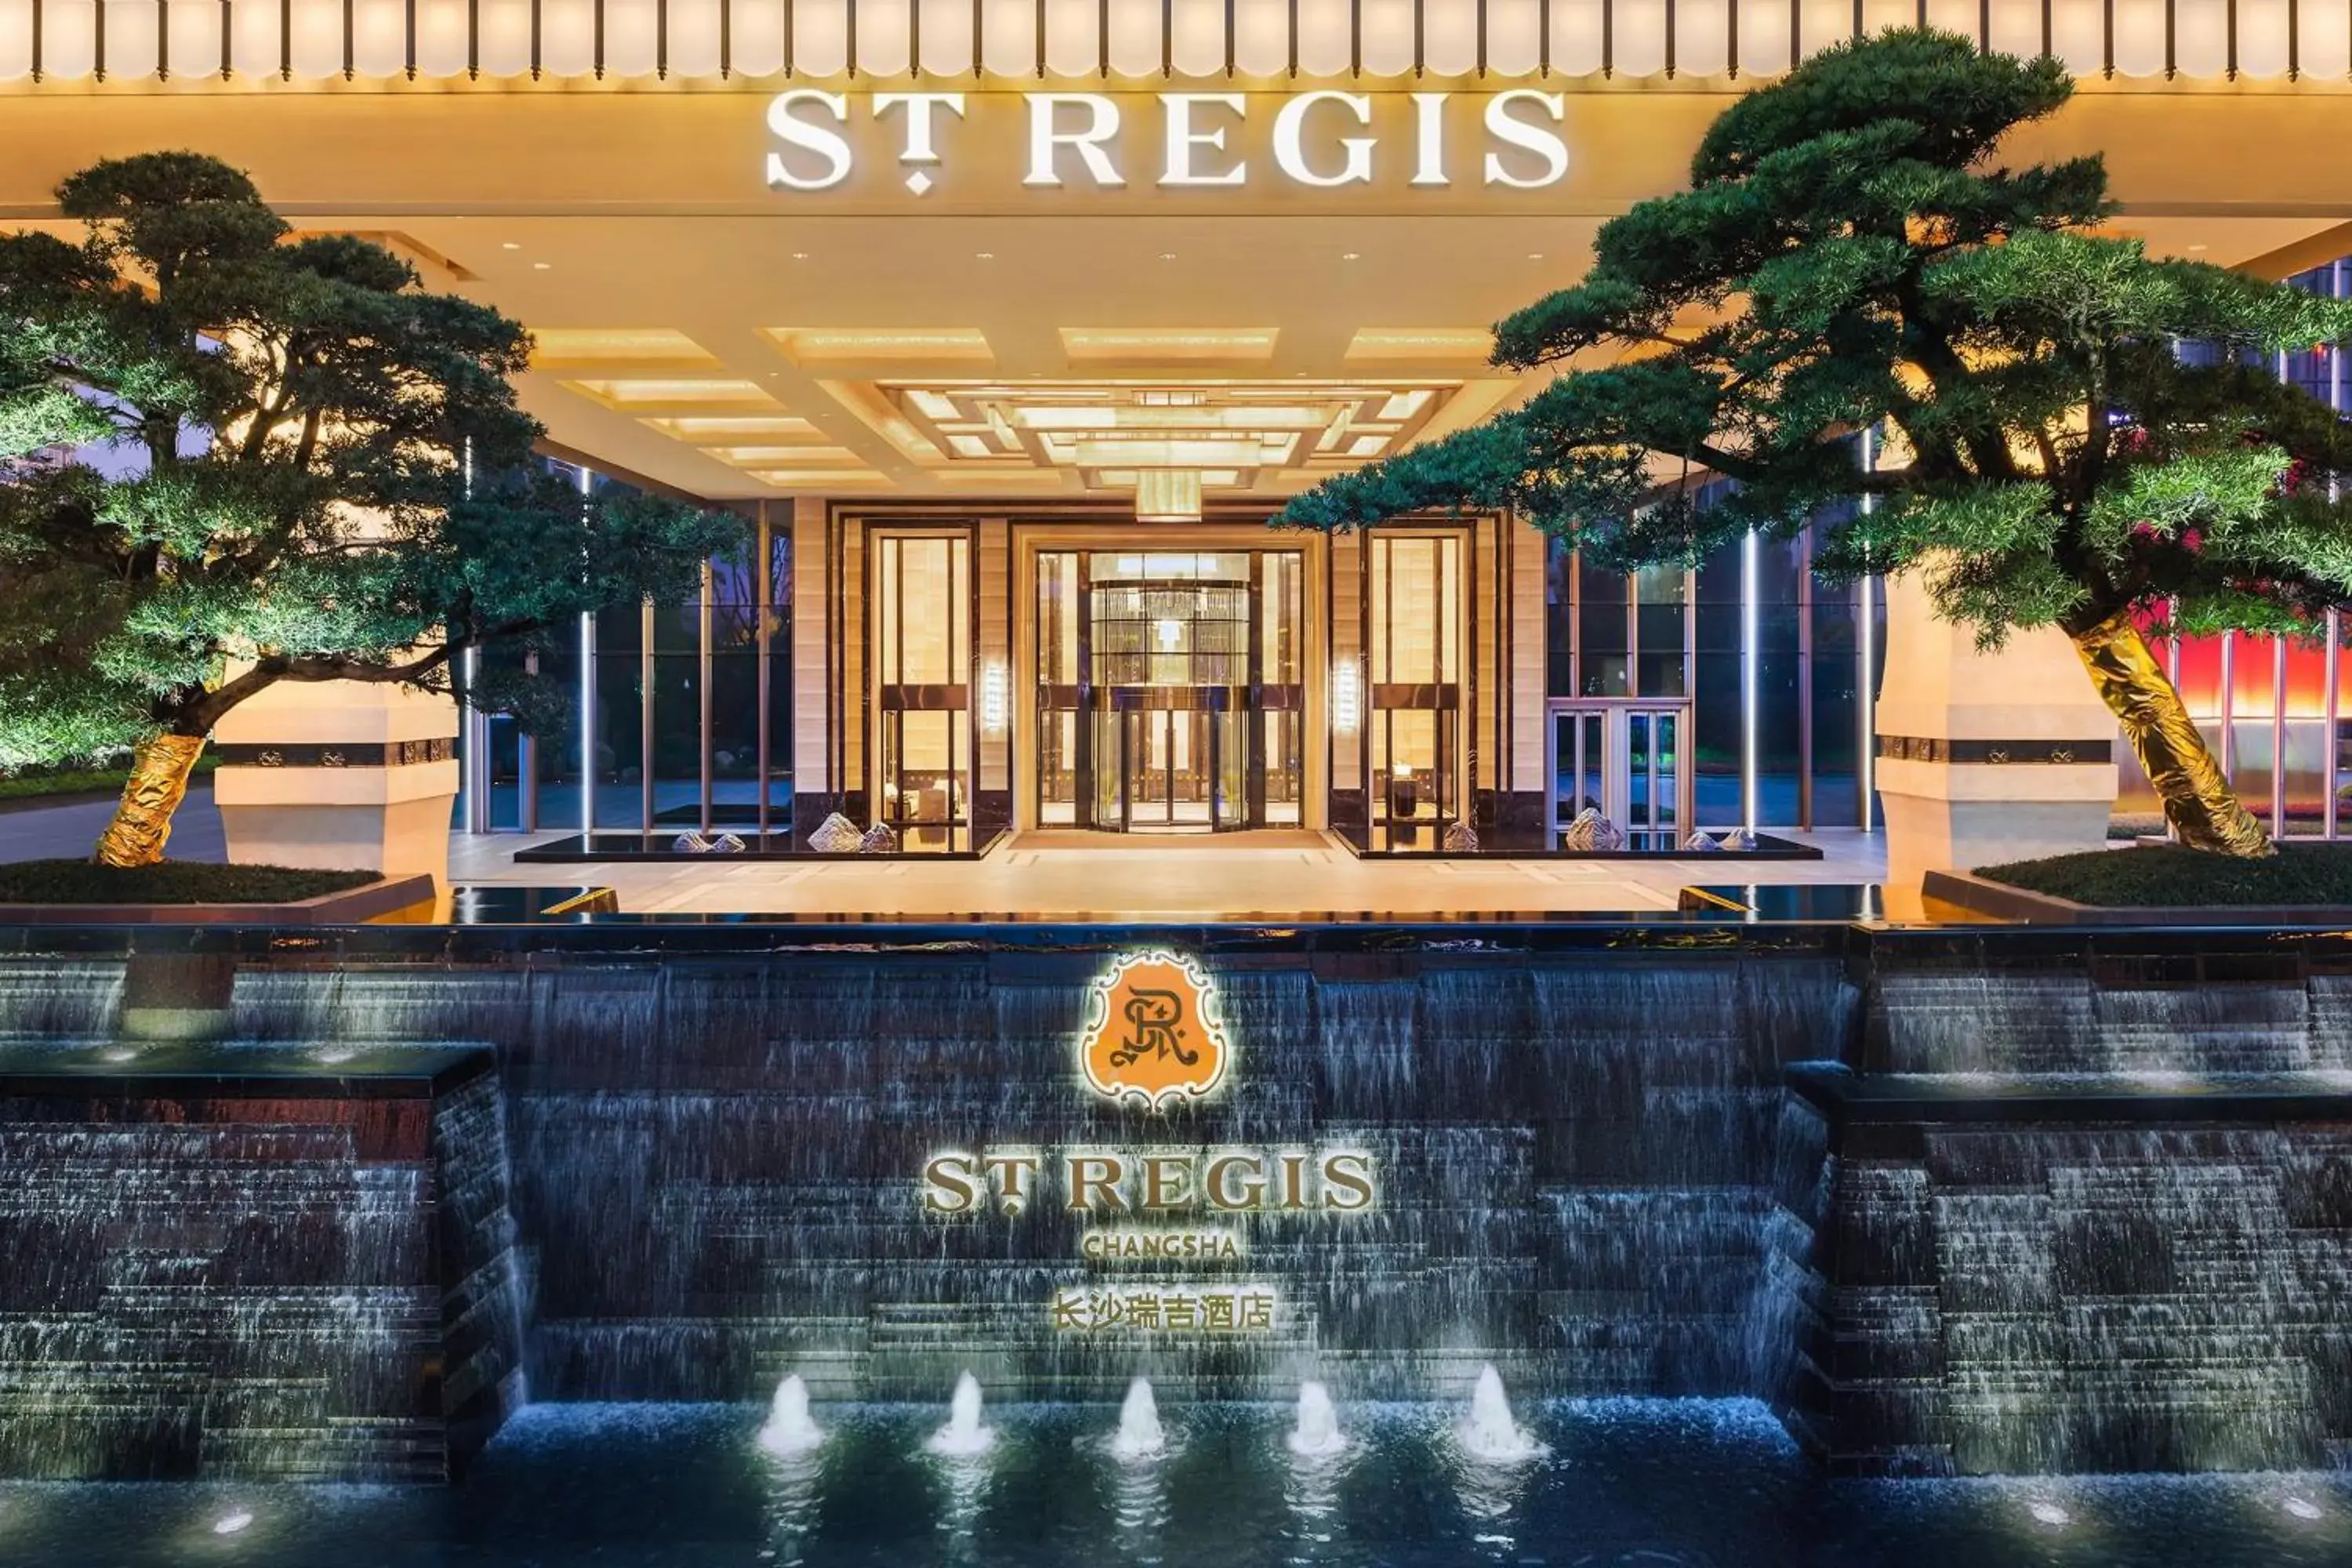 Property building in The St. Regis Changsha